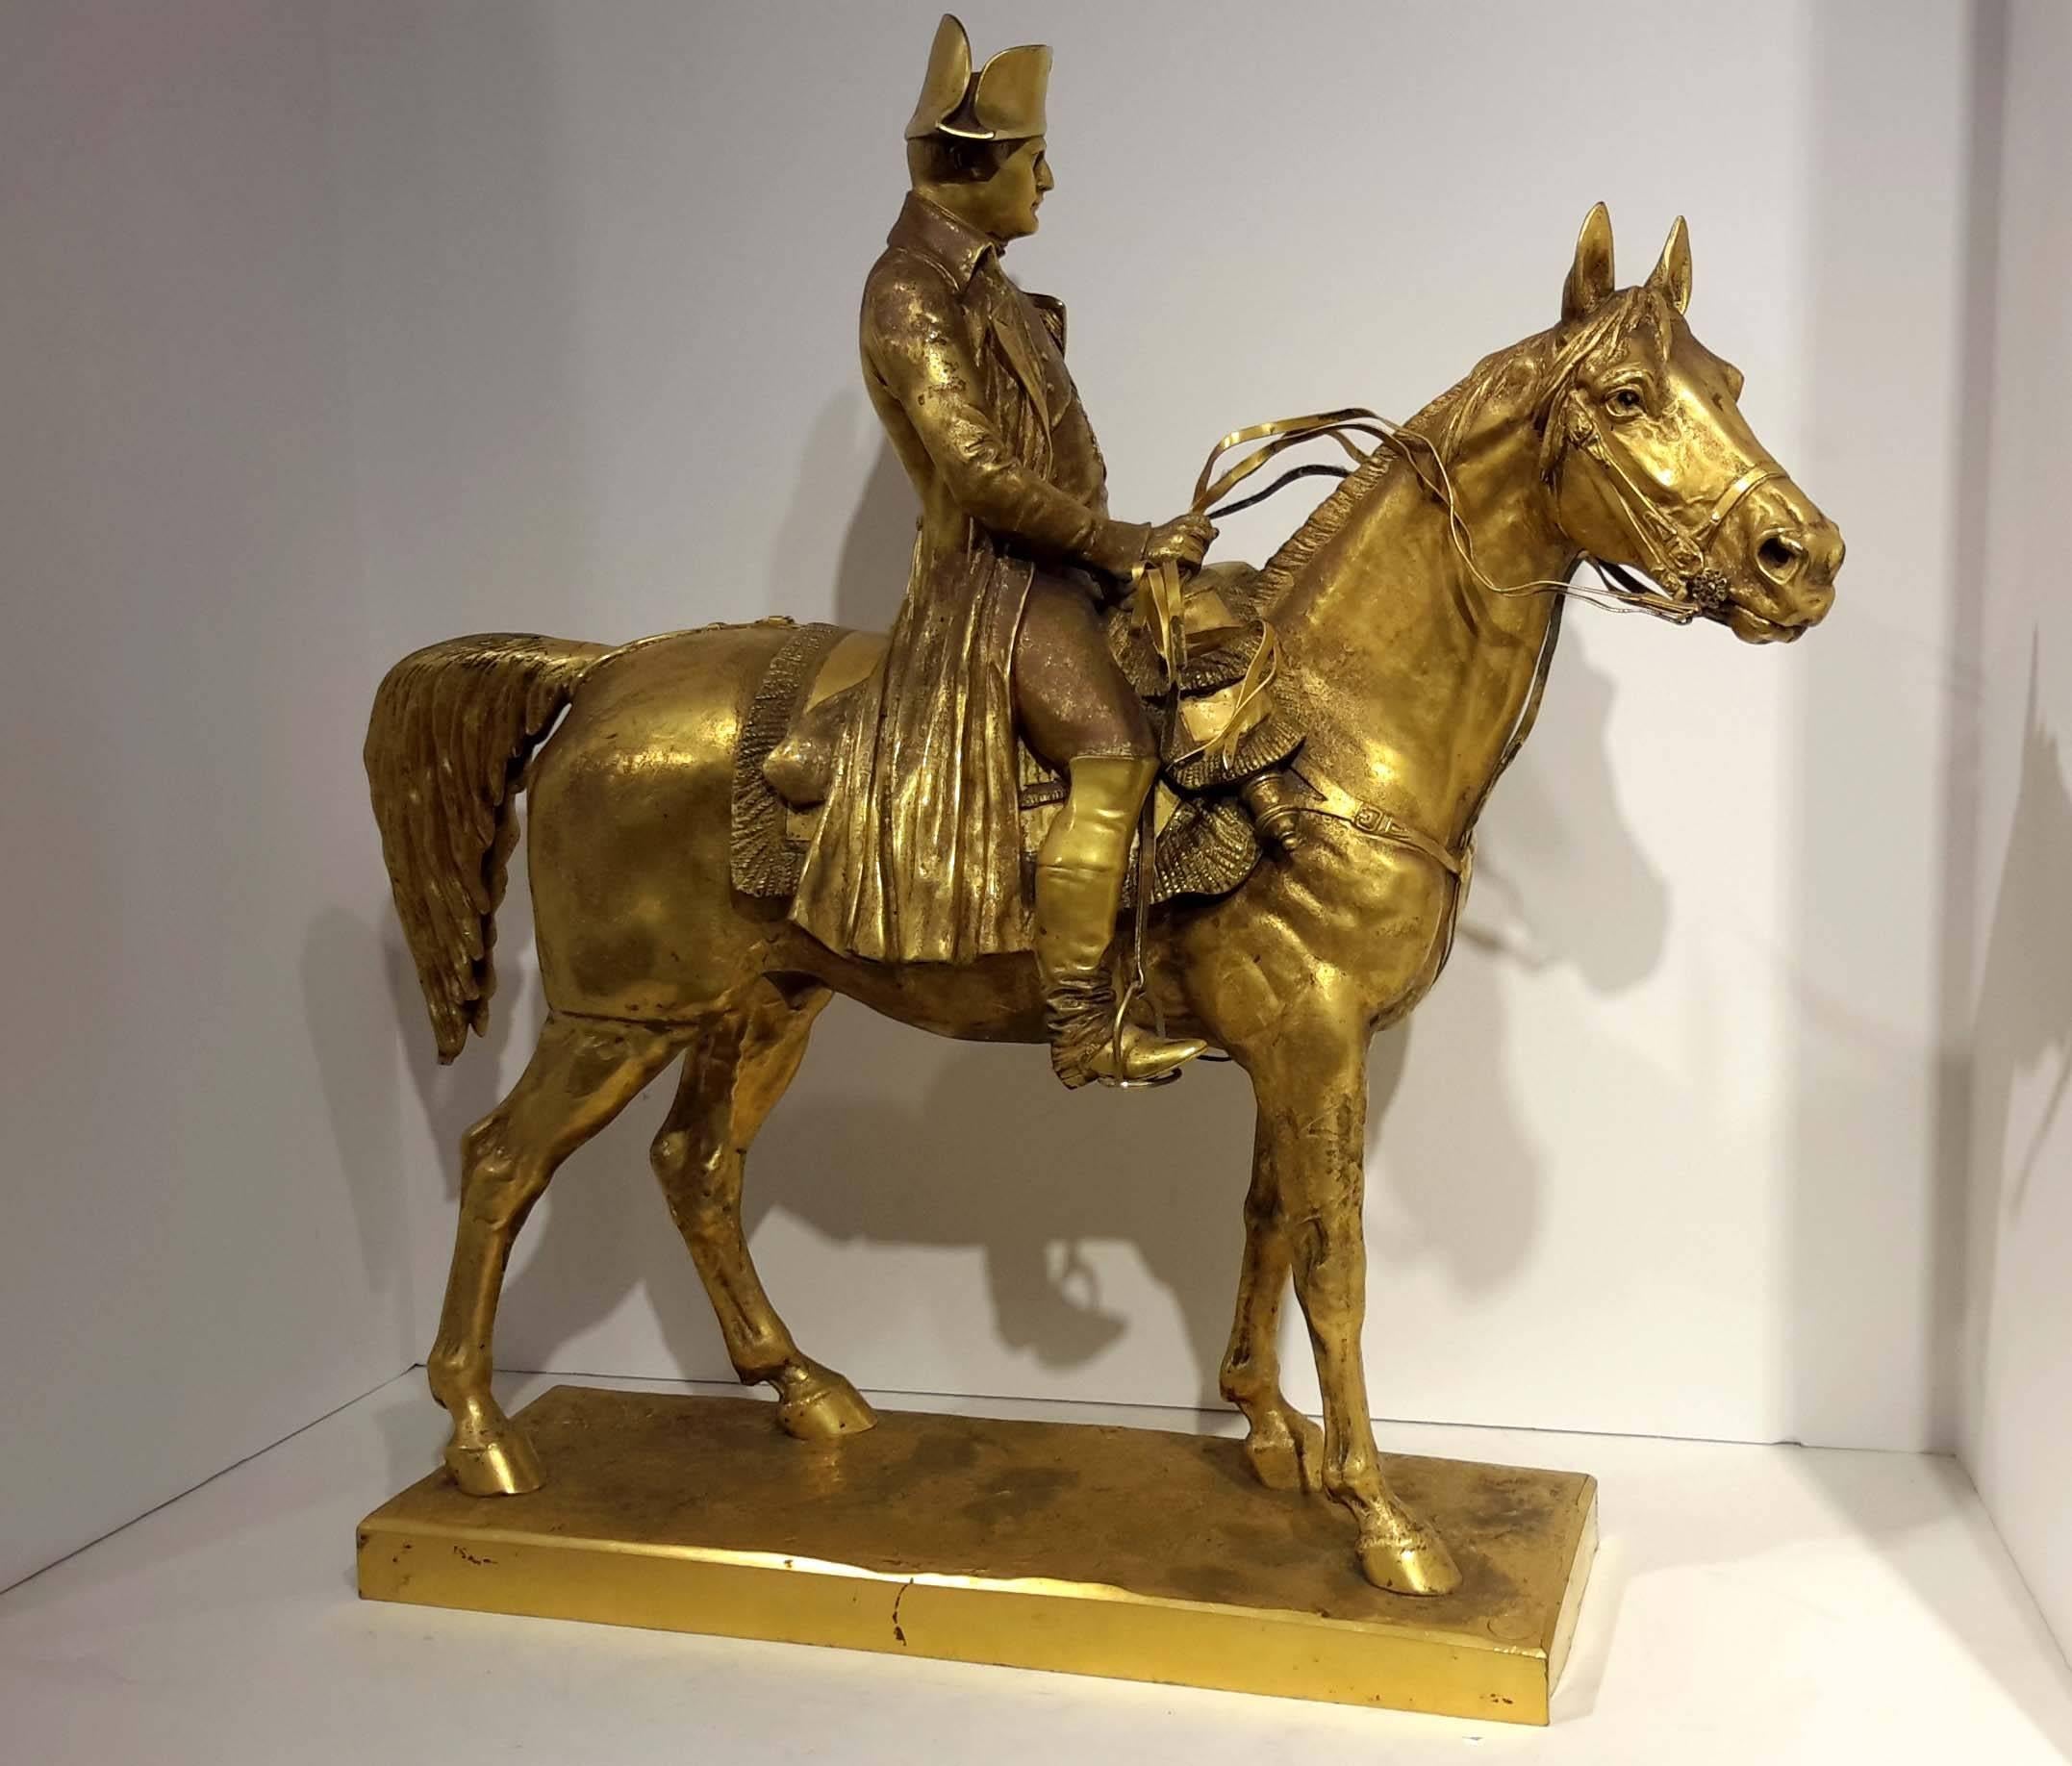 French gilt bronze equestrian mounted figure of Napoleon Bonaparte, the figure wearing a bicorn hat, breeches, vest and long coat, seated on a fringed saddle, cast after Louis-Marie Morise, naturalistic base signed Morise, Pinedo foundry stamp, also